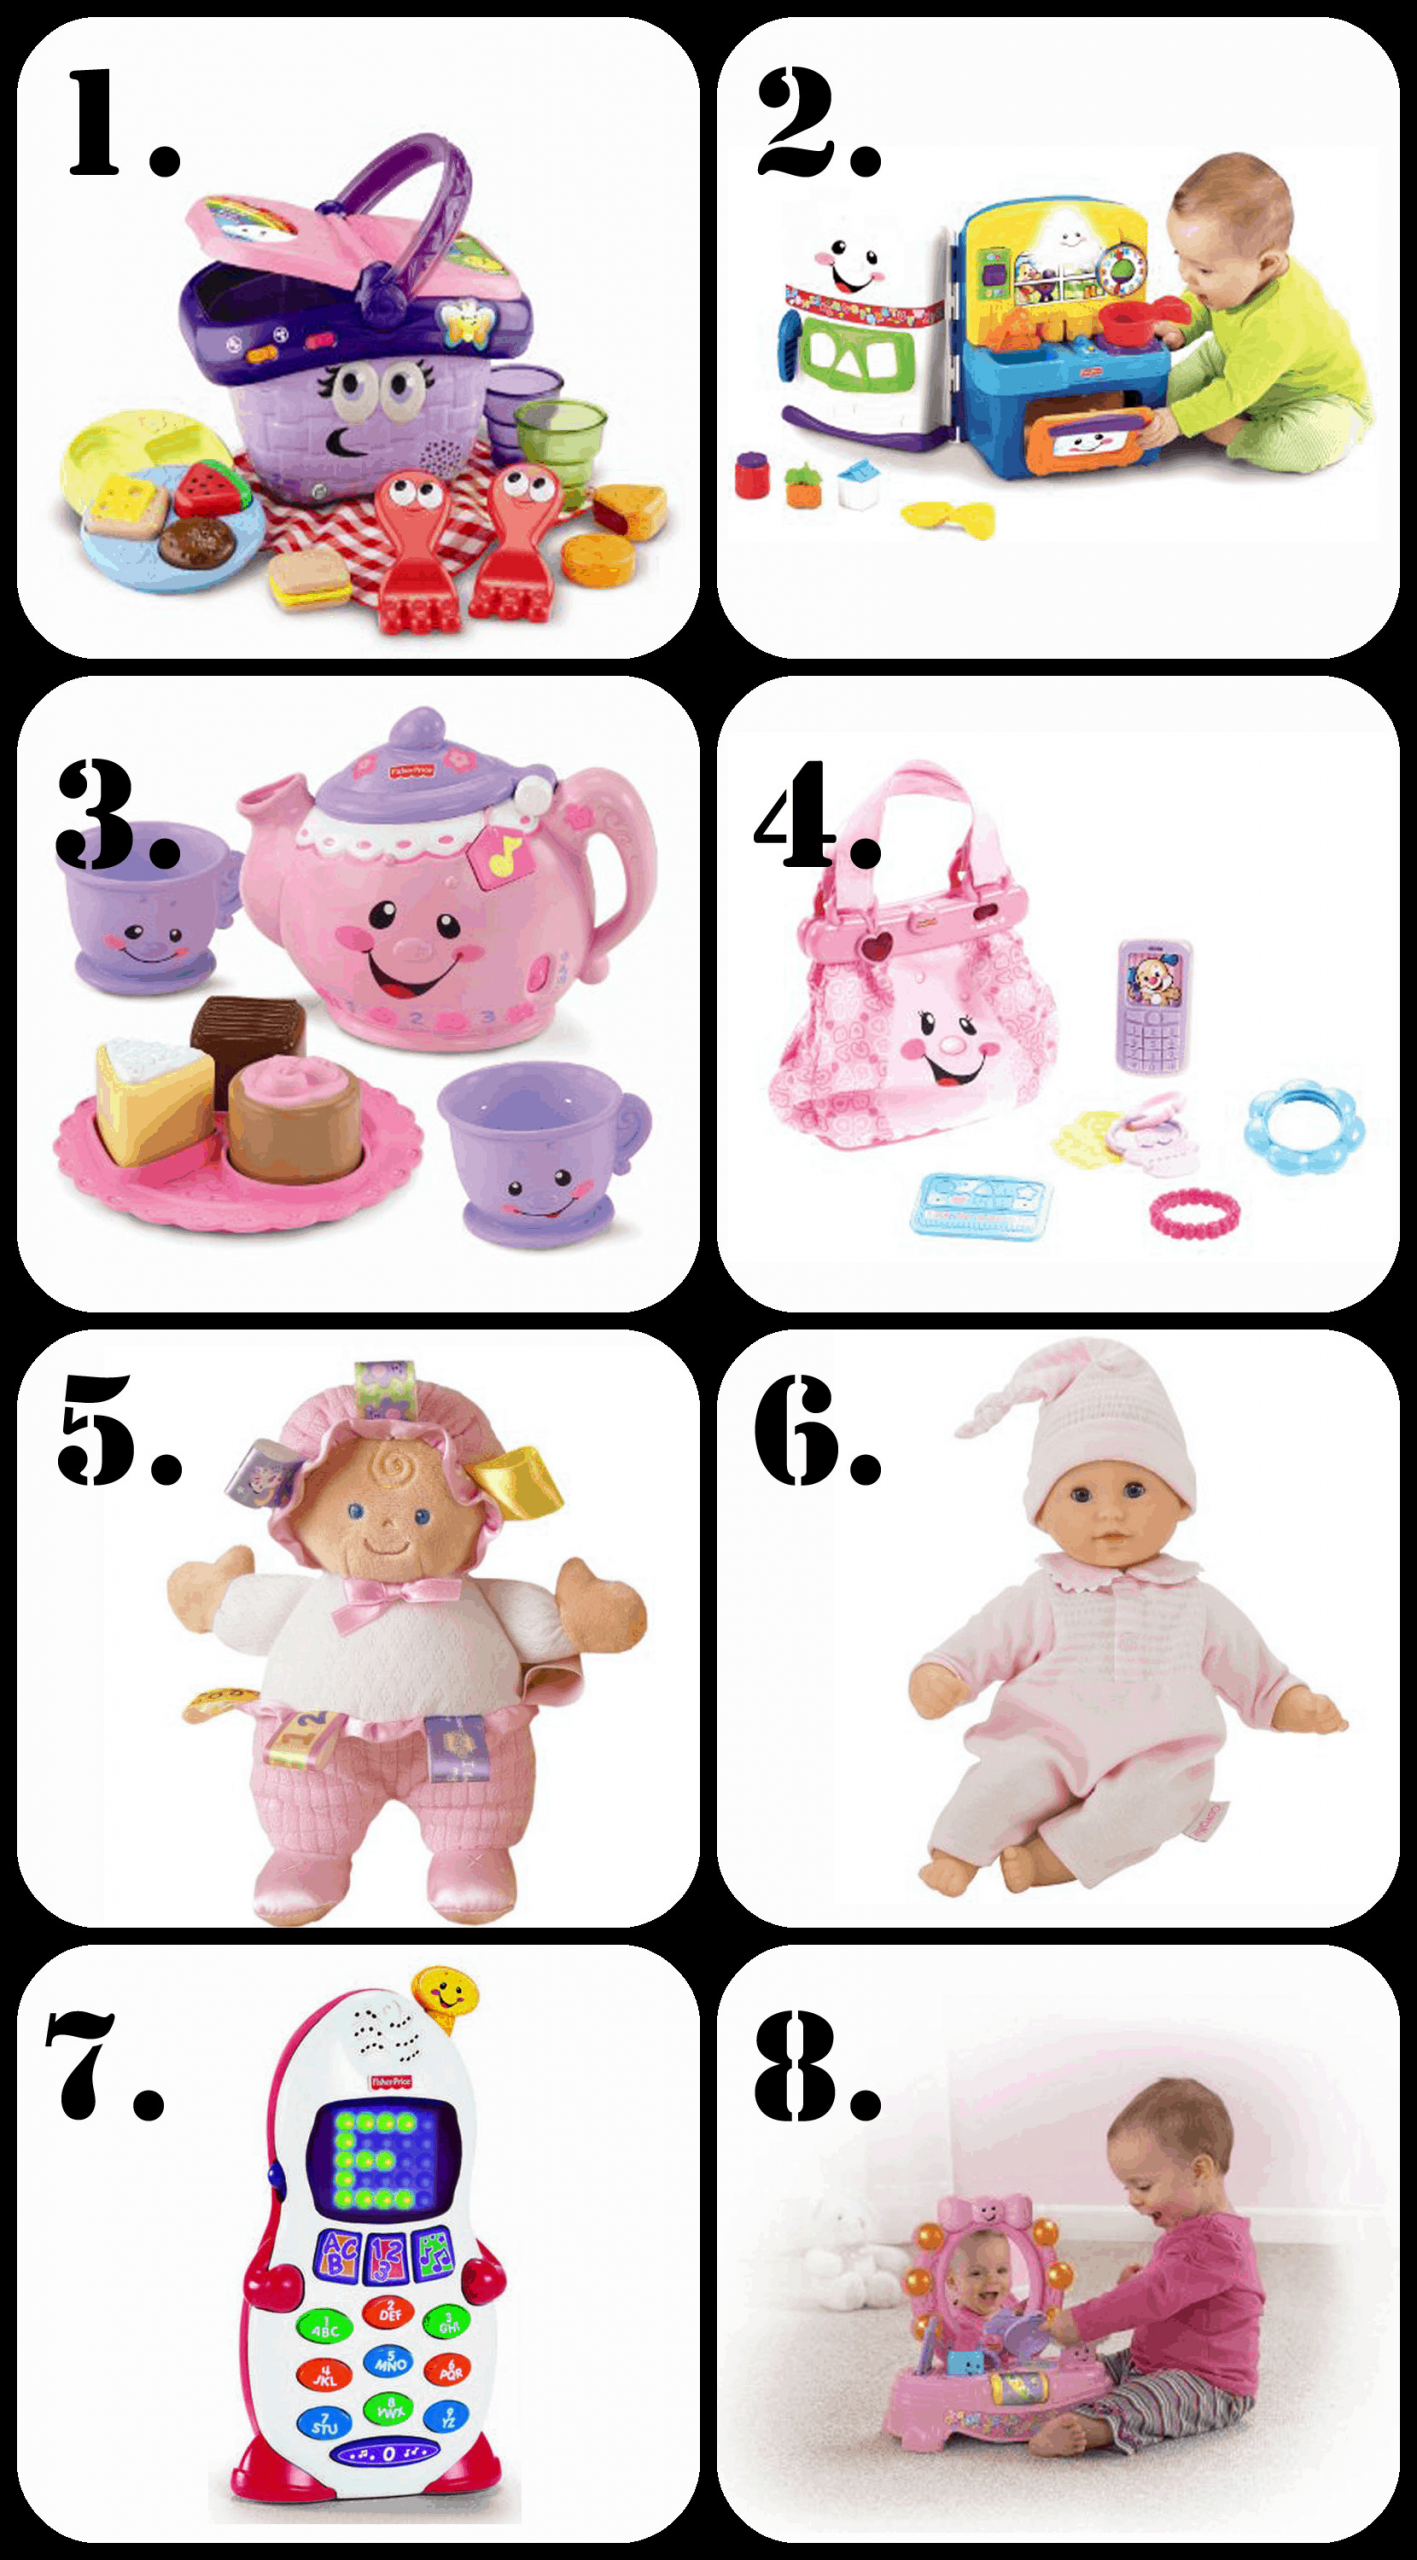 Gift For 1 Year Old Baby Girl Birthday
 The Ultimate List of Gift Ideas for a 1 Year Old Girl